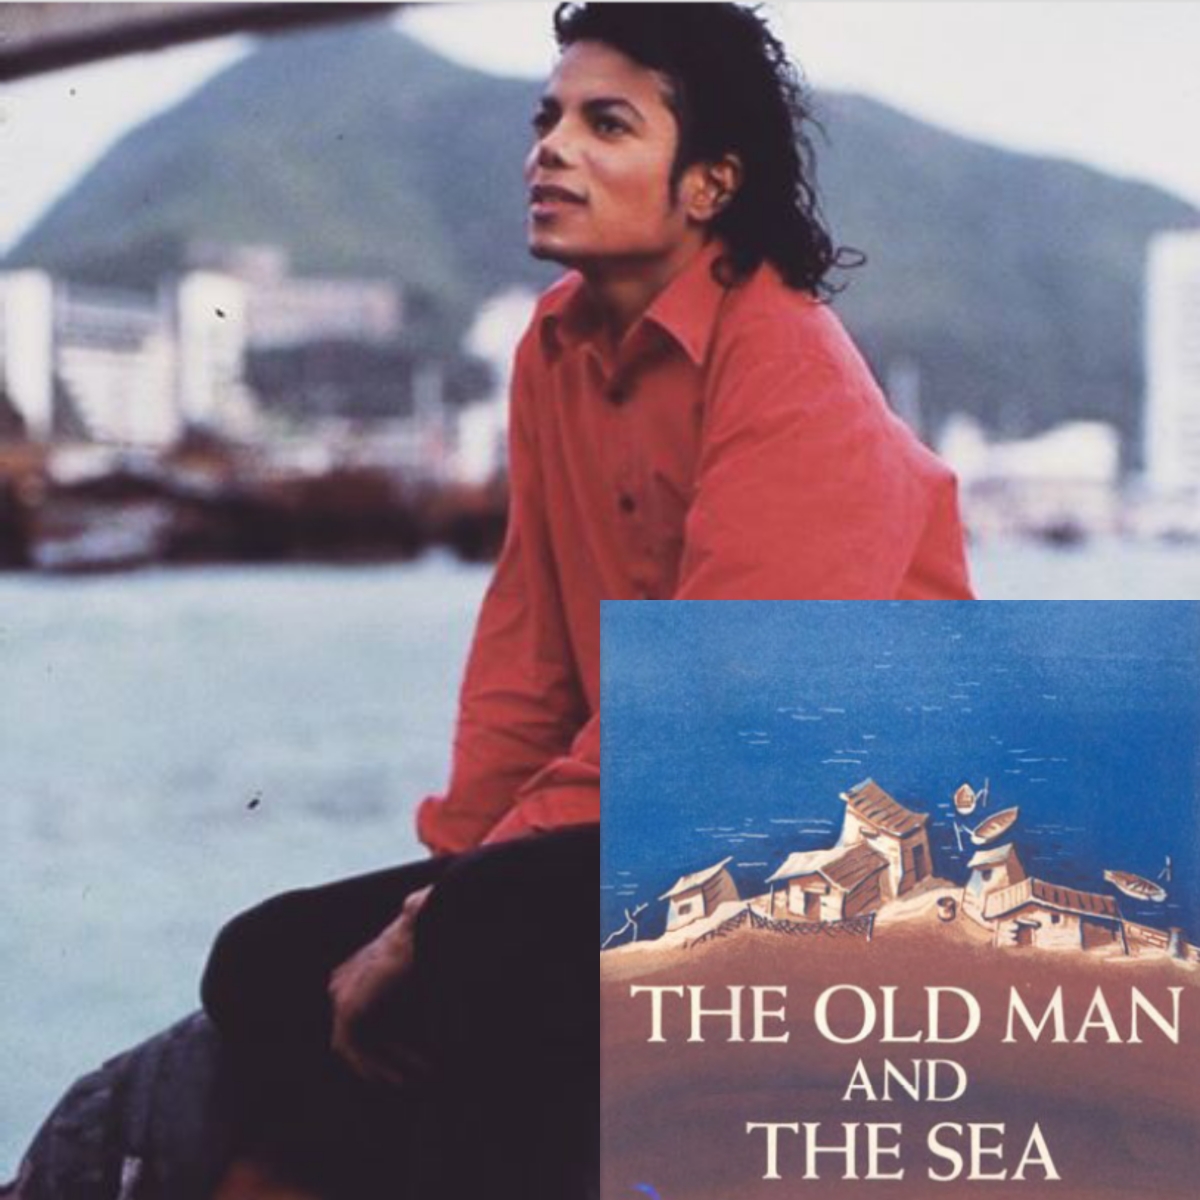 Michael Jackson and The Old Man And The Sea – Ernest Hemingway – 1952.